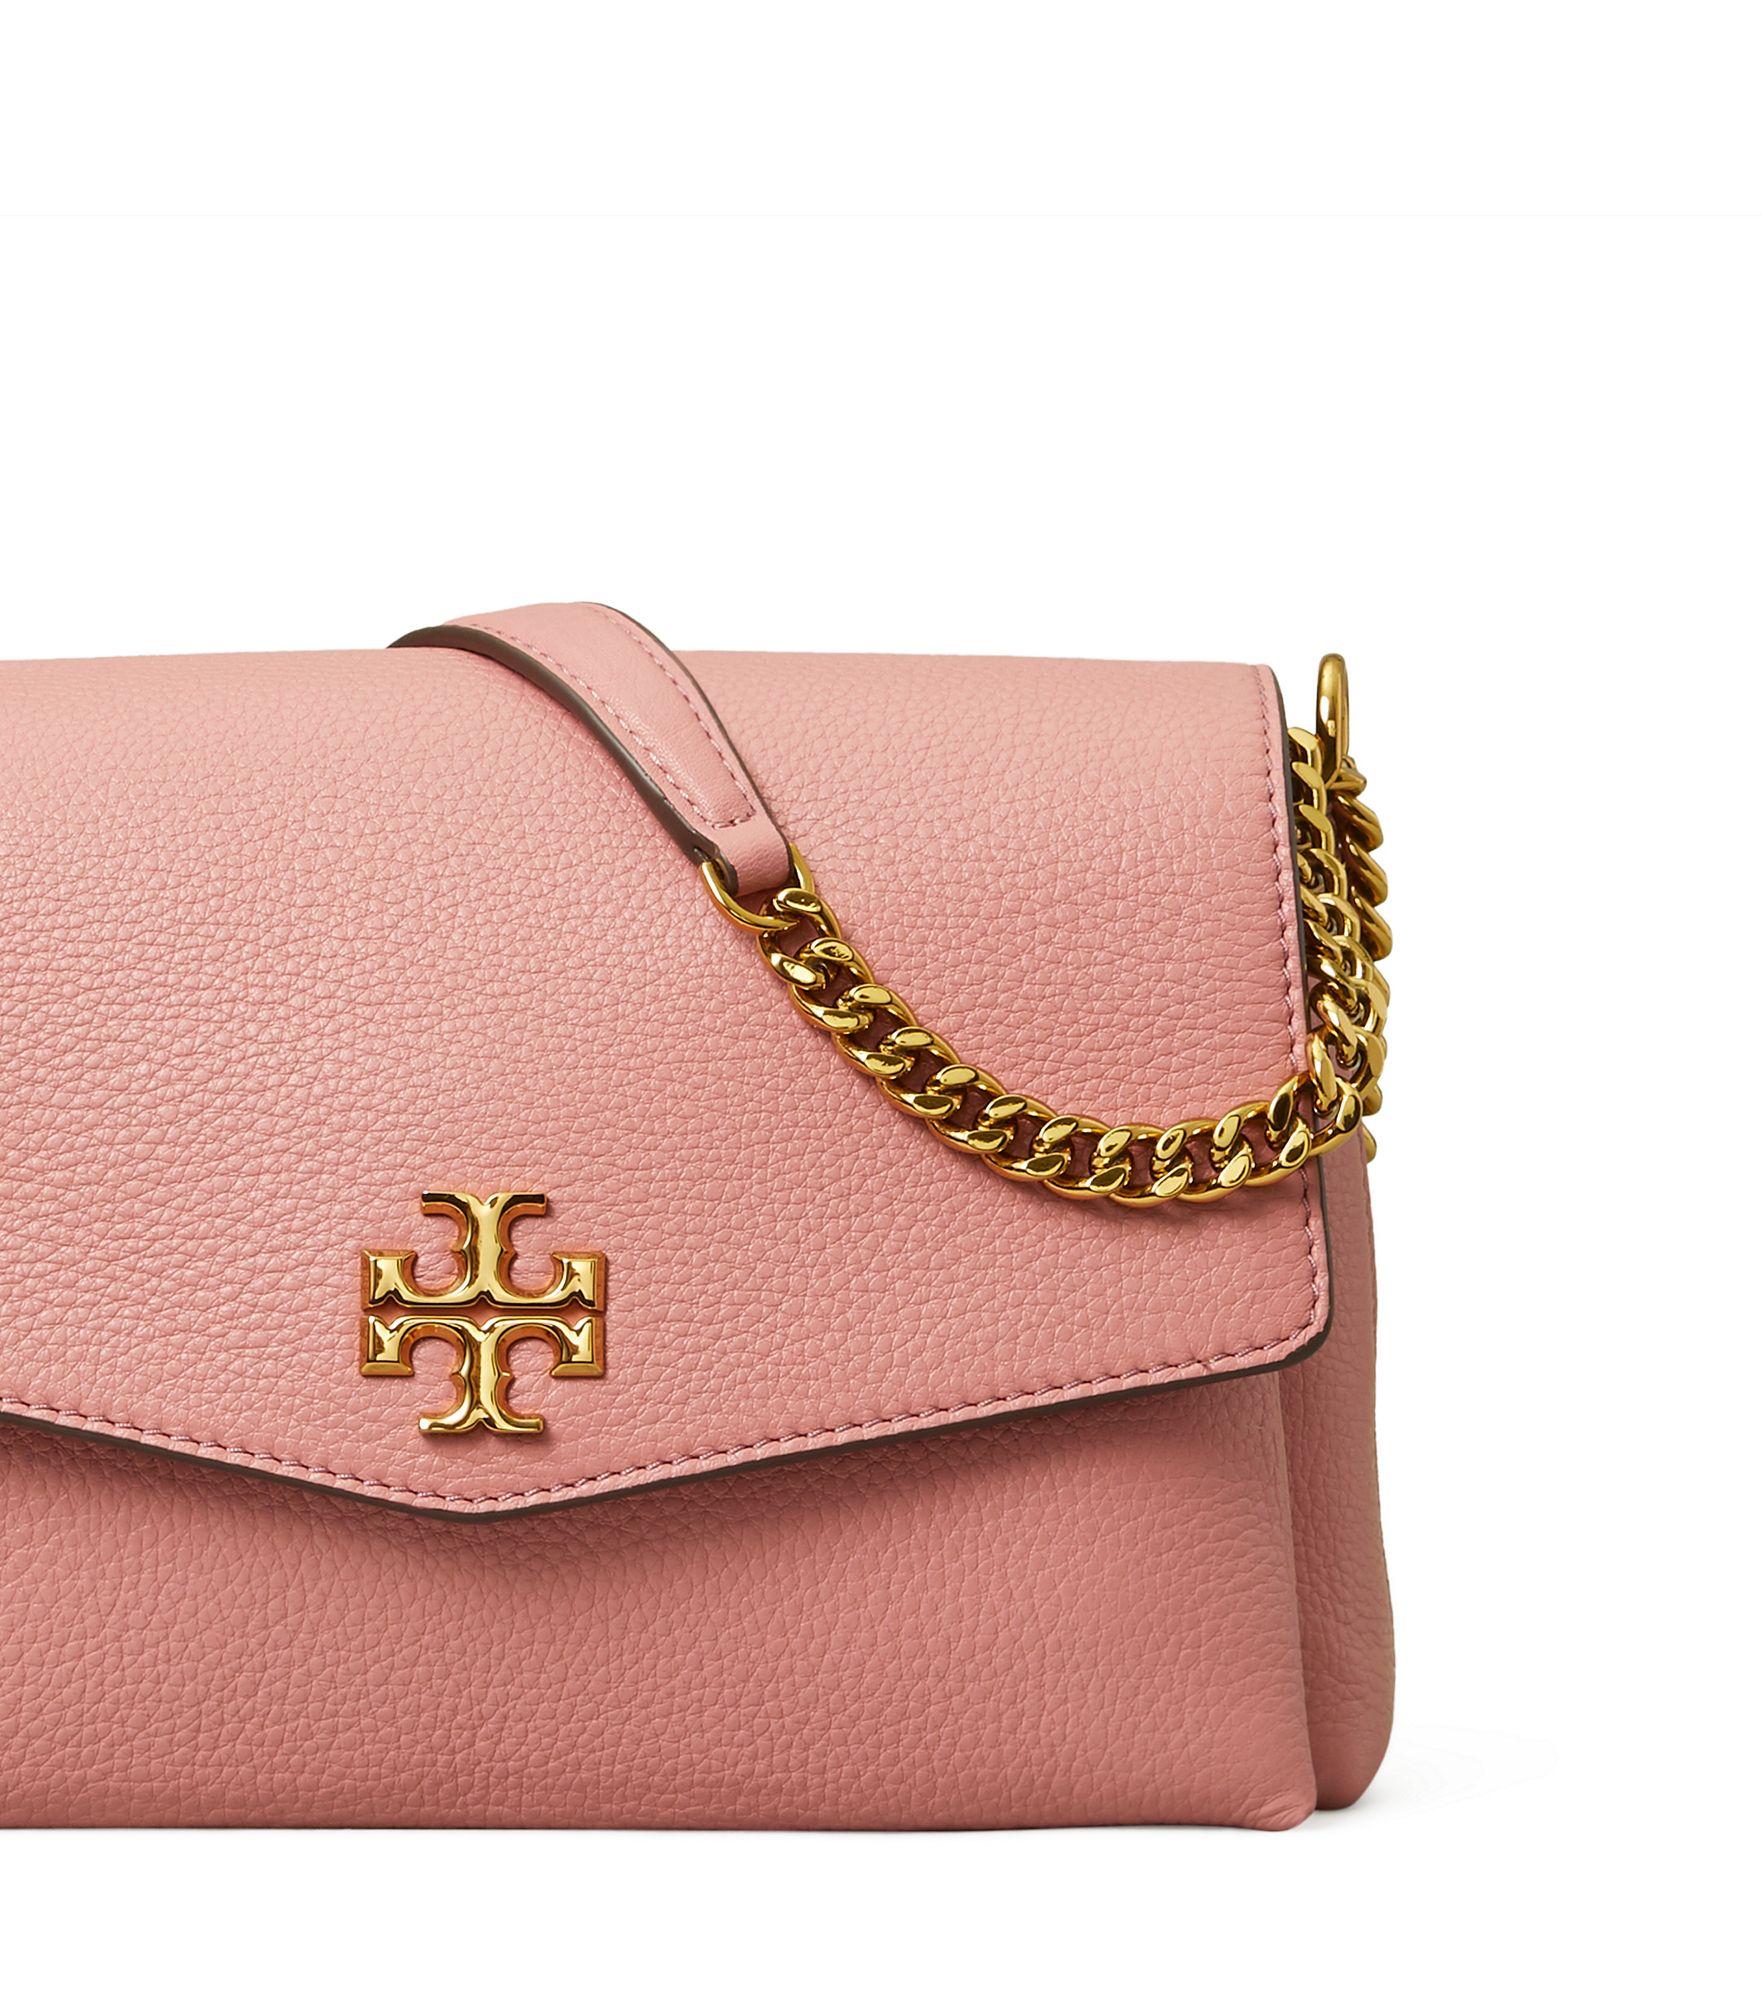 Tory Burch Leather Kira Pebbled Small Convertible Shoulder Bag in Pink